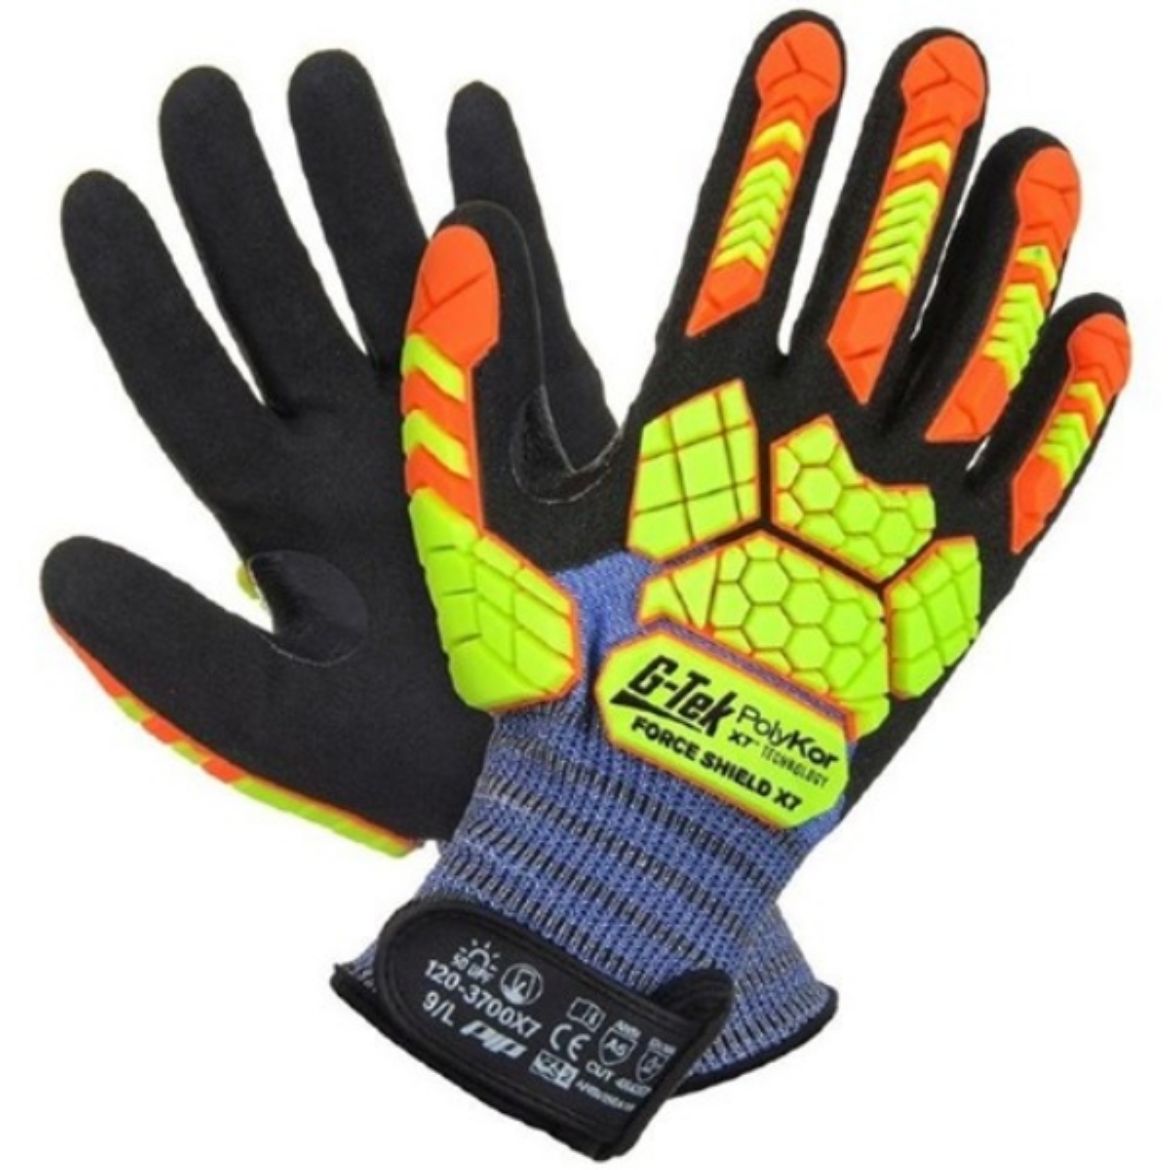 Picture of MAXITEK POLYKOR X7 CUT E GLOVES. AVAILABLE IN SIZES 7 - 11